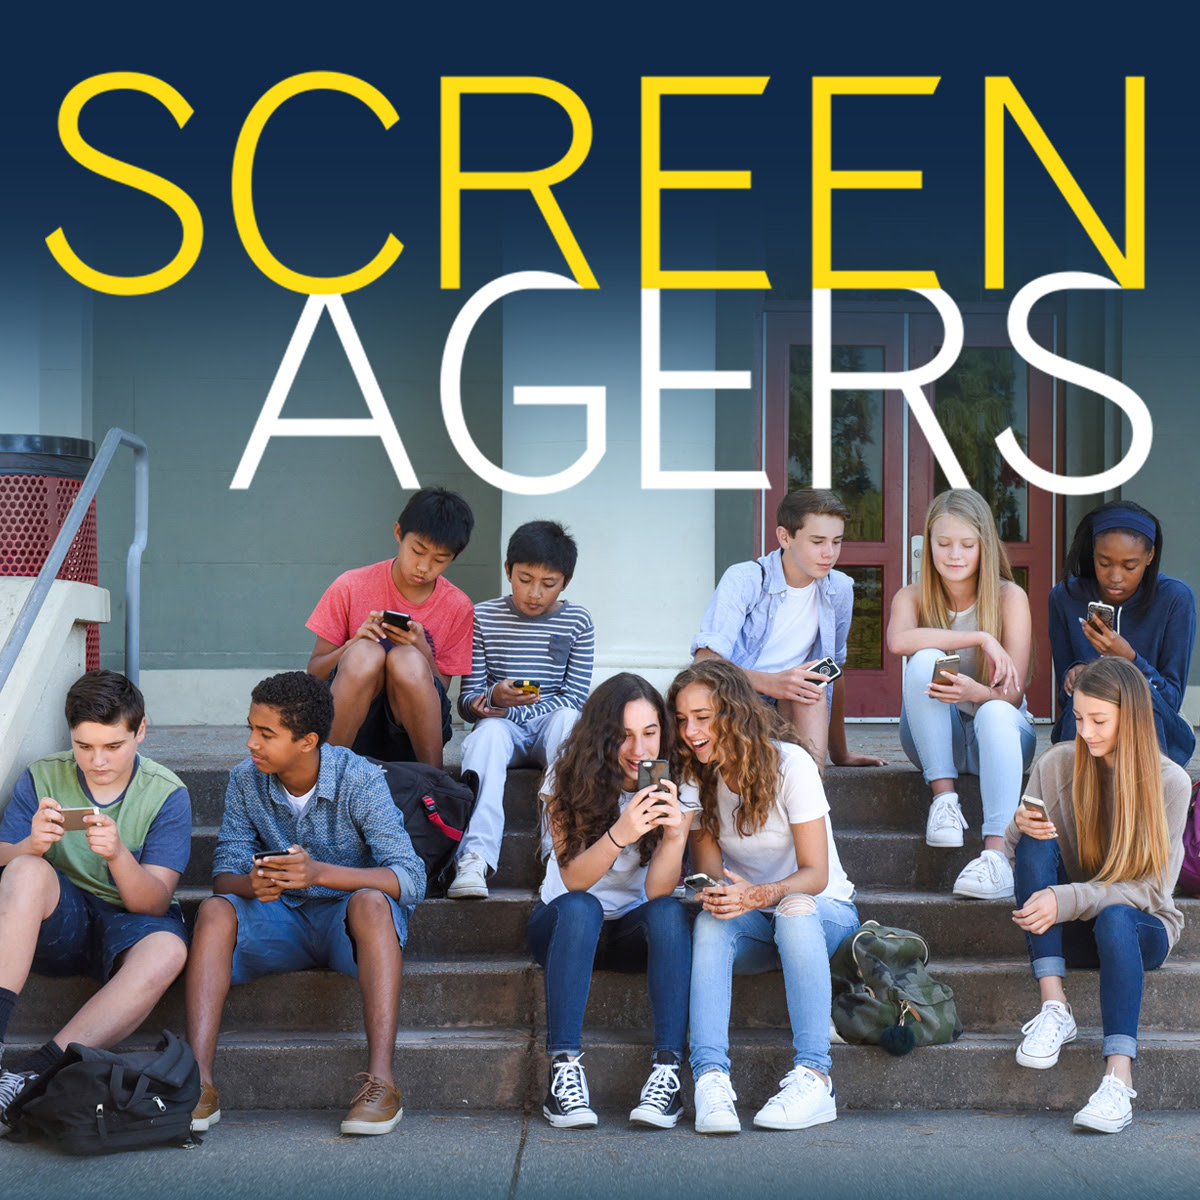 Screenagers Film Presented By Mauston High School